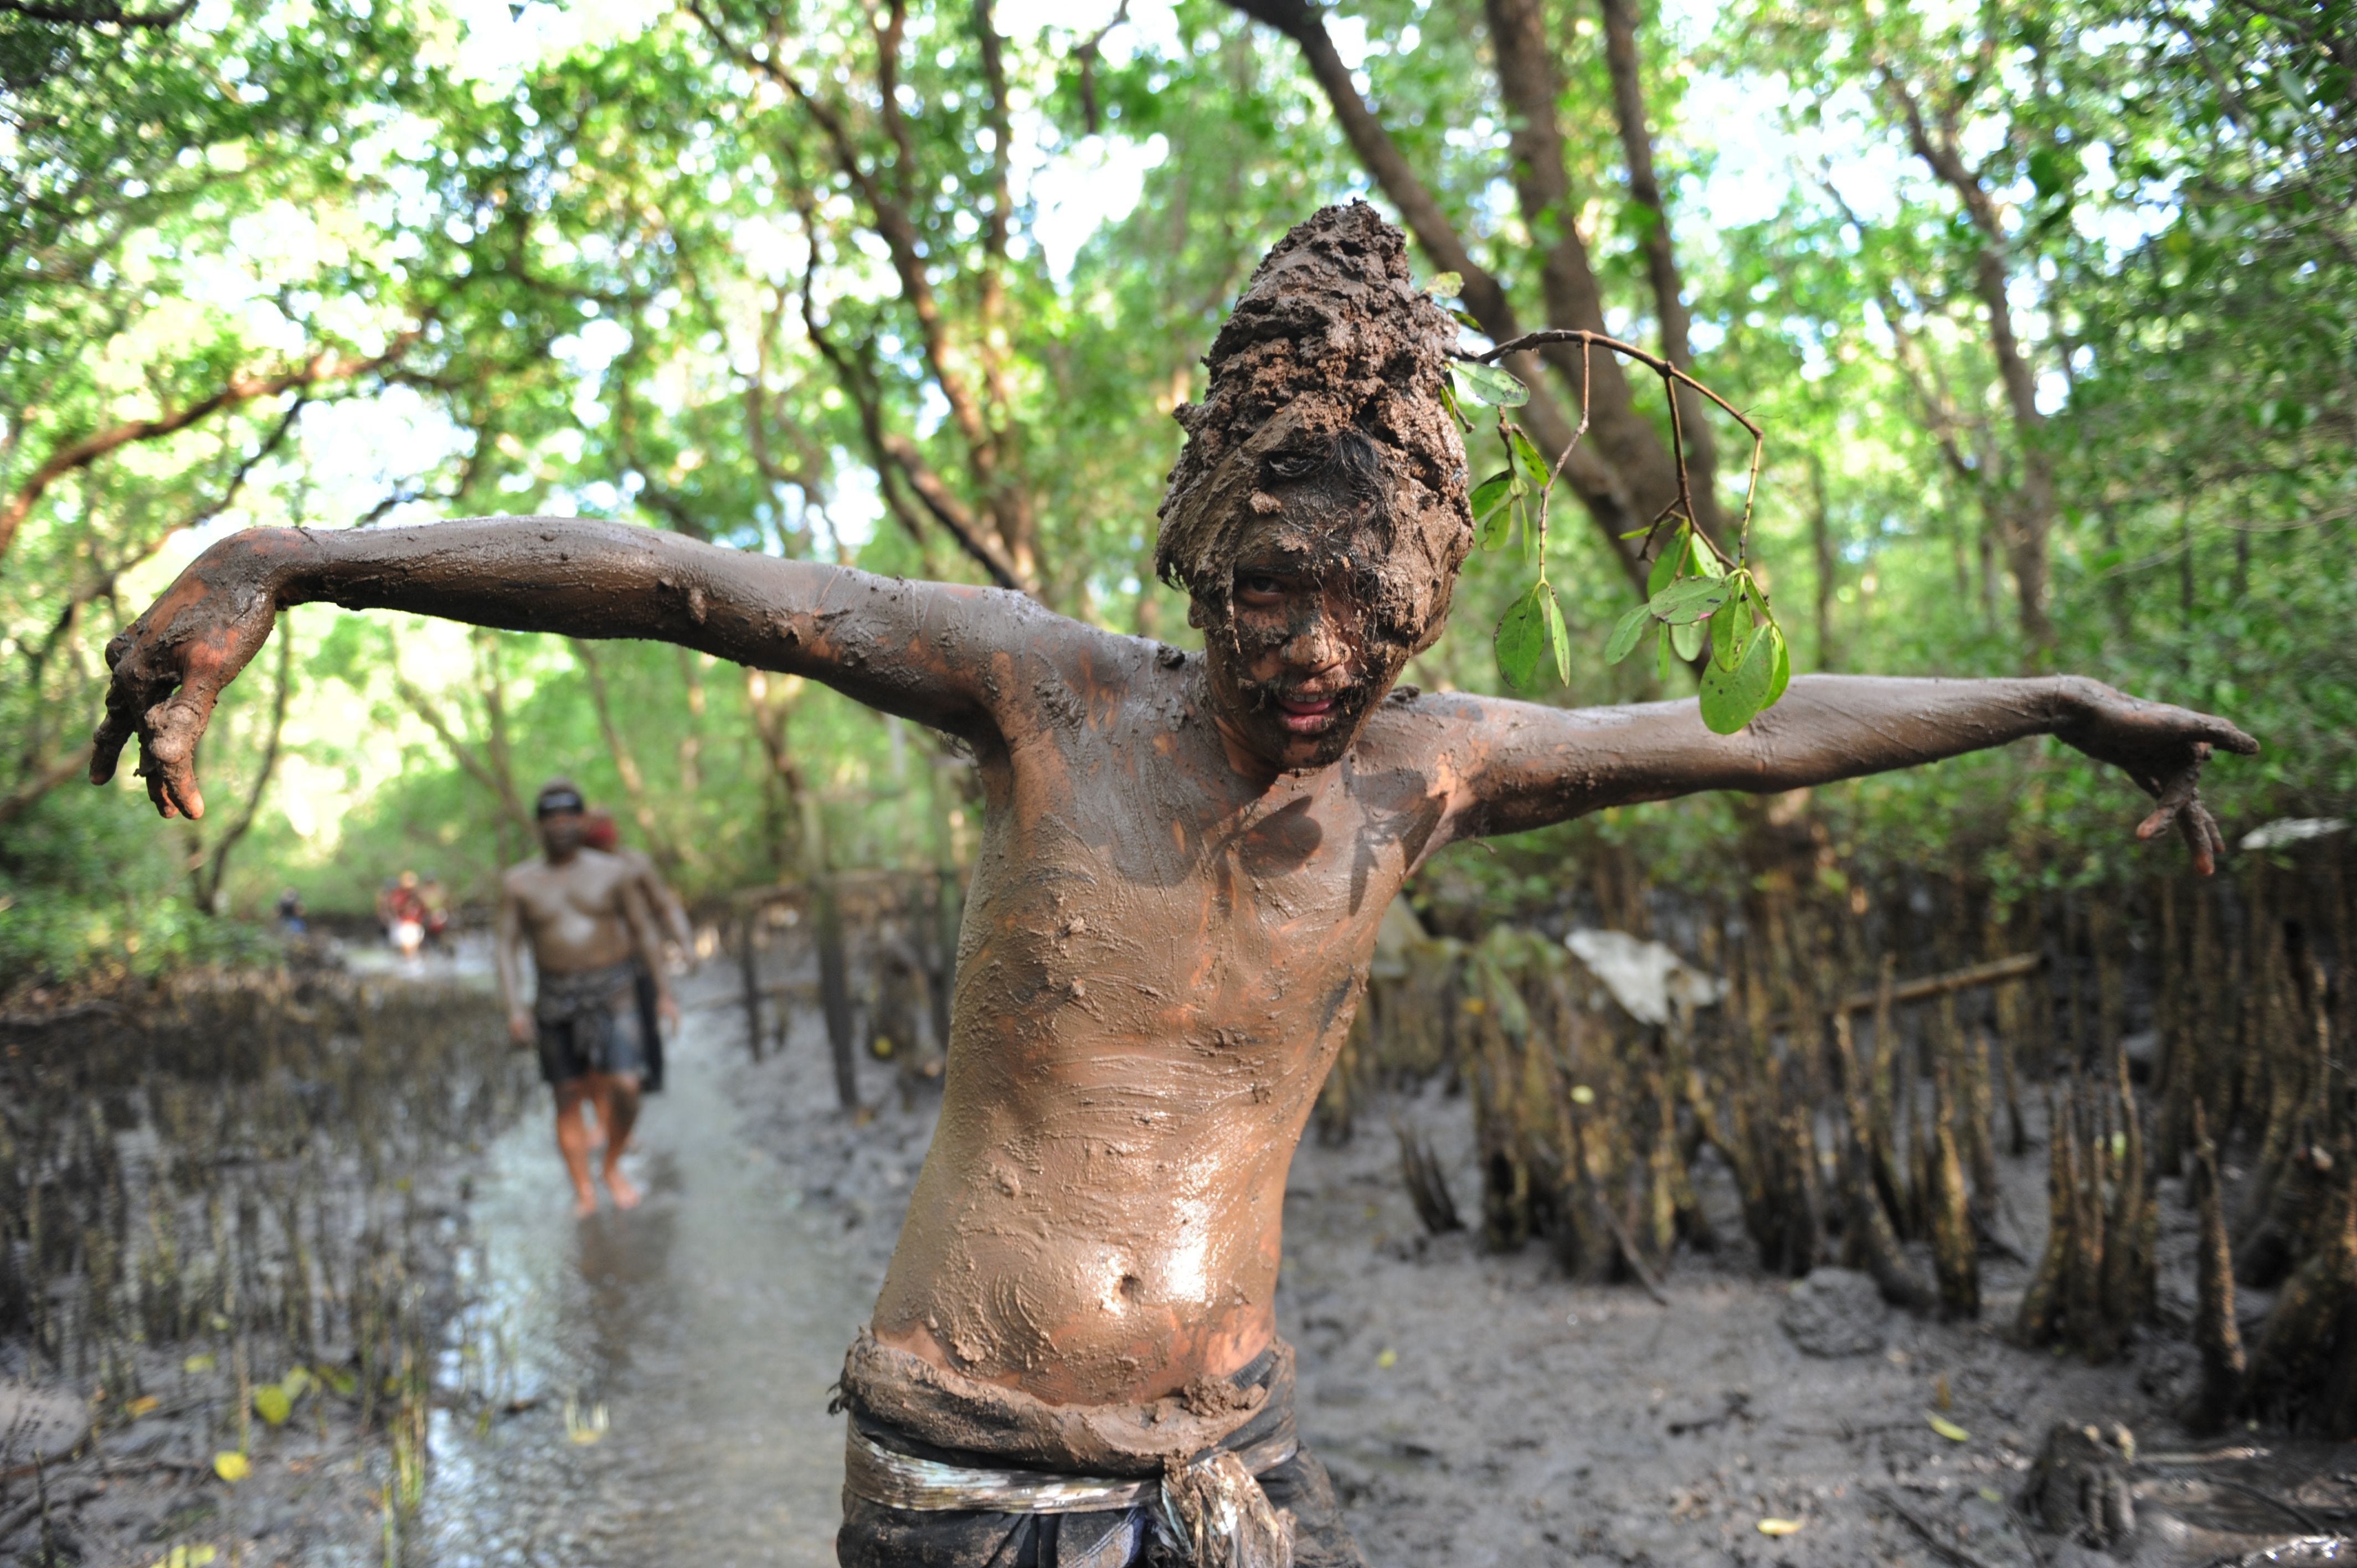 A Balinese boy puts mud on his body during a traditional mud baths known as Mebuug-buugan, in Kedonganan village, near Denpasar on Indonesia's resort island of Bali on March 18, 2018. The Mebuug-buugan is held a day after Nyepi aimed at neutralizing 